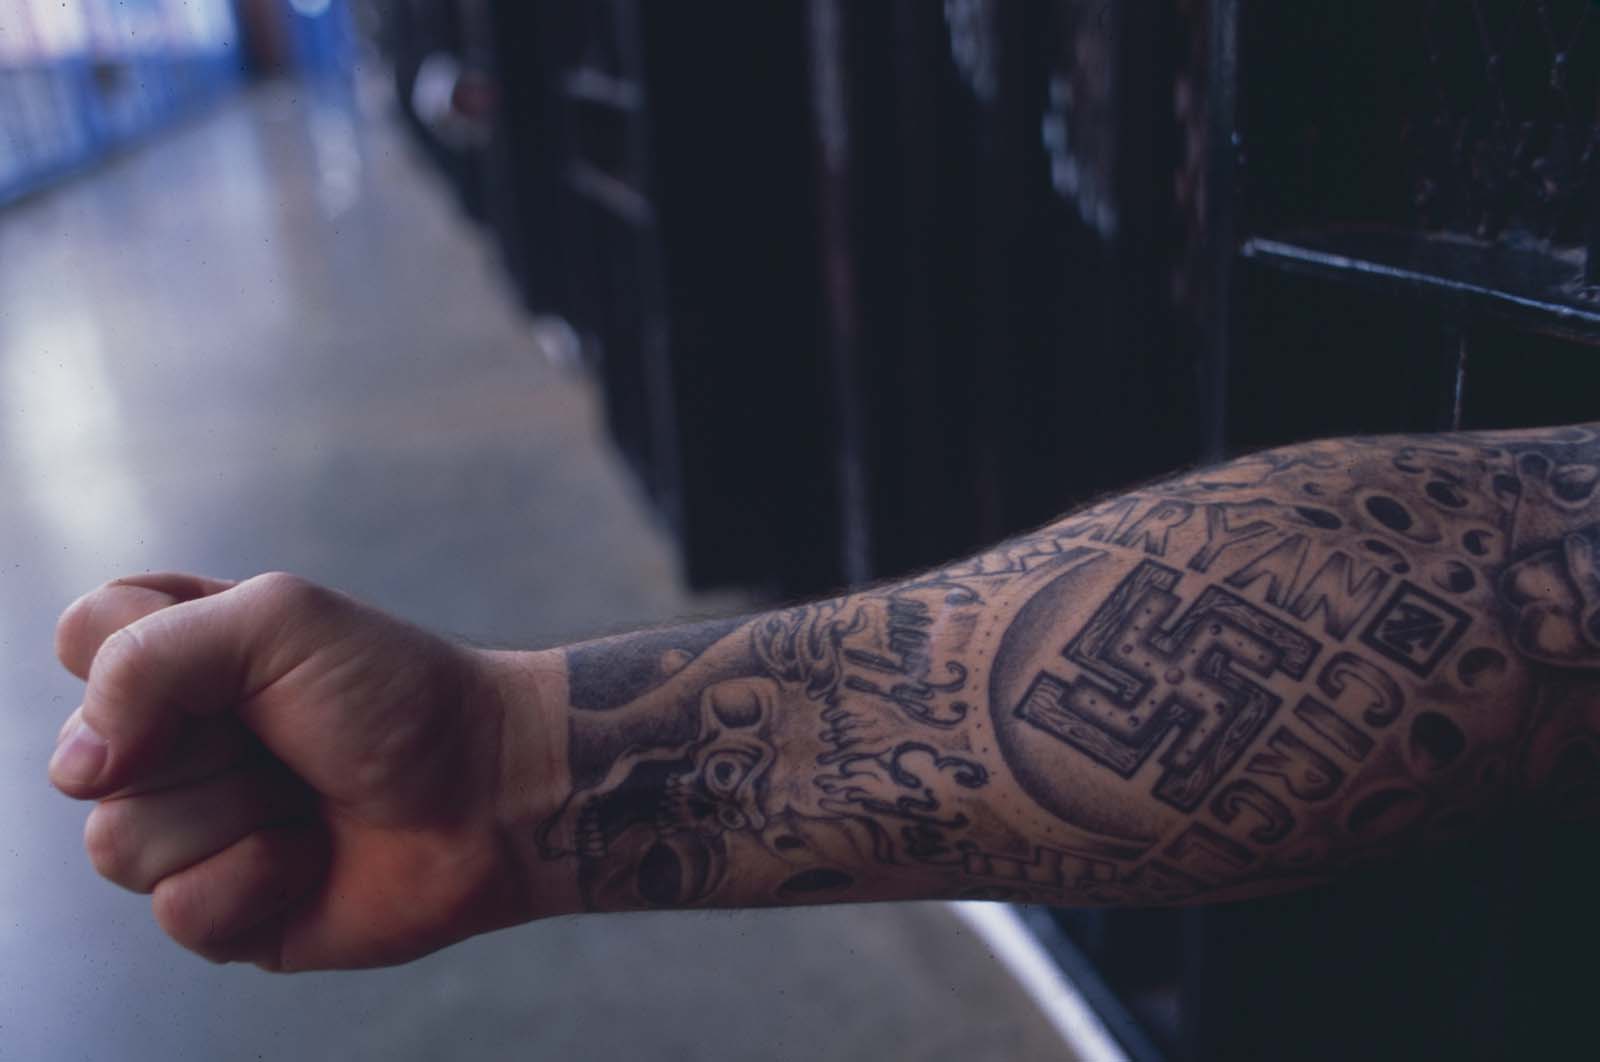 The symbols and meanings behind gang-related tattoos